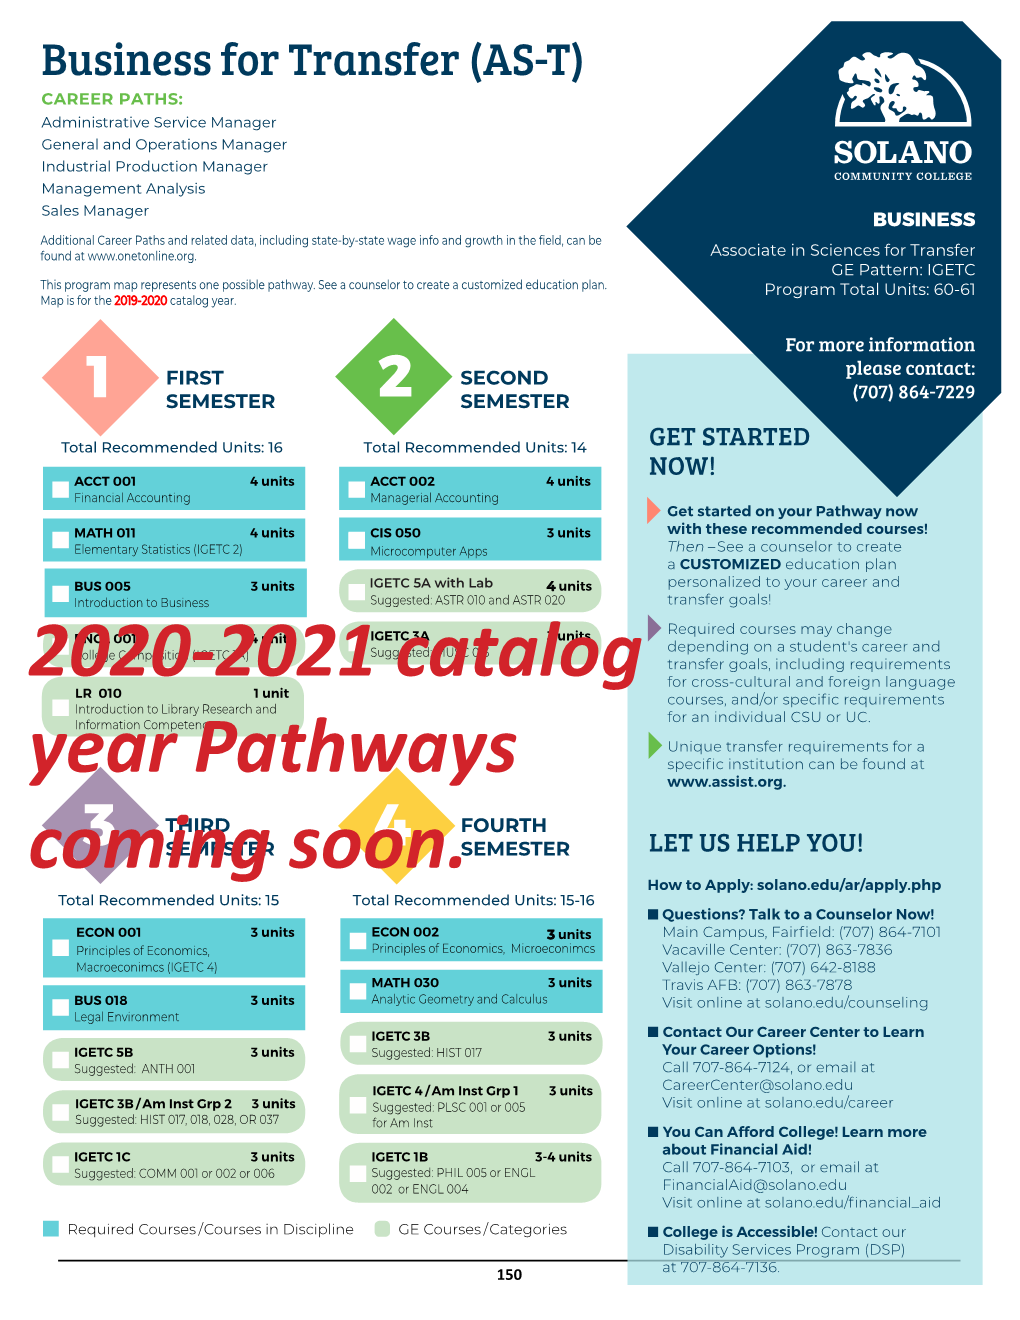 2020-2021 Catalog Year Pathways Coming Soon